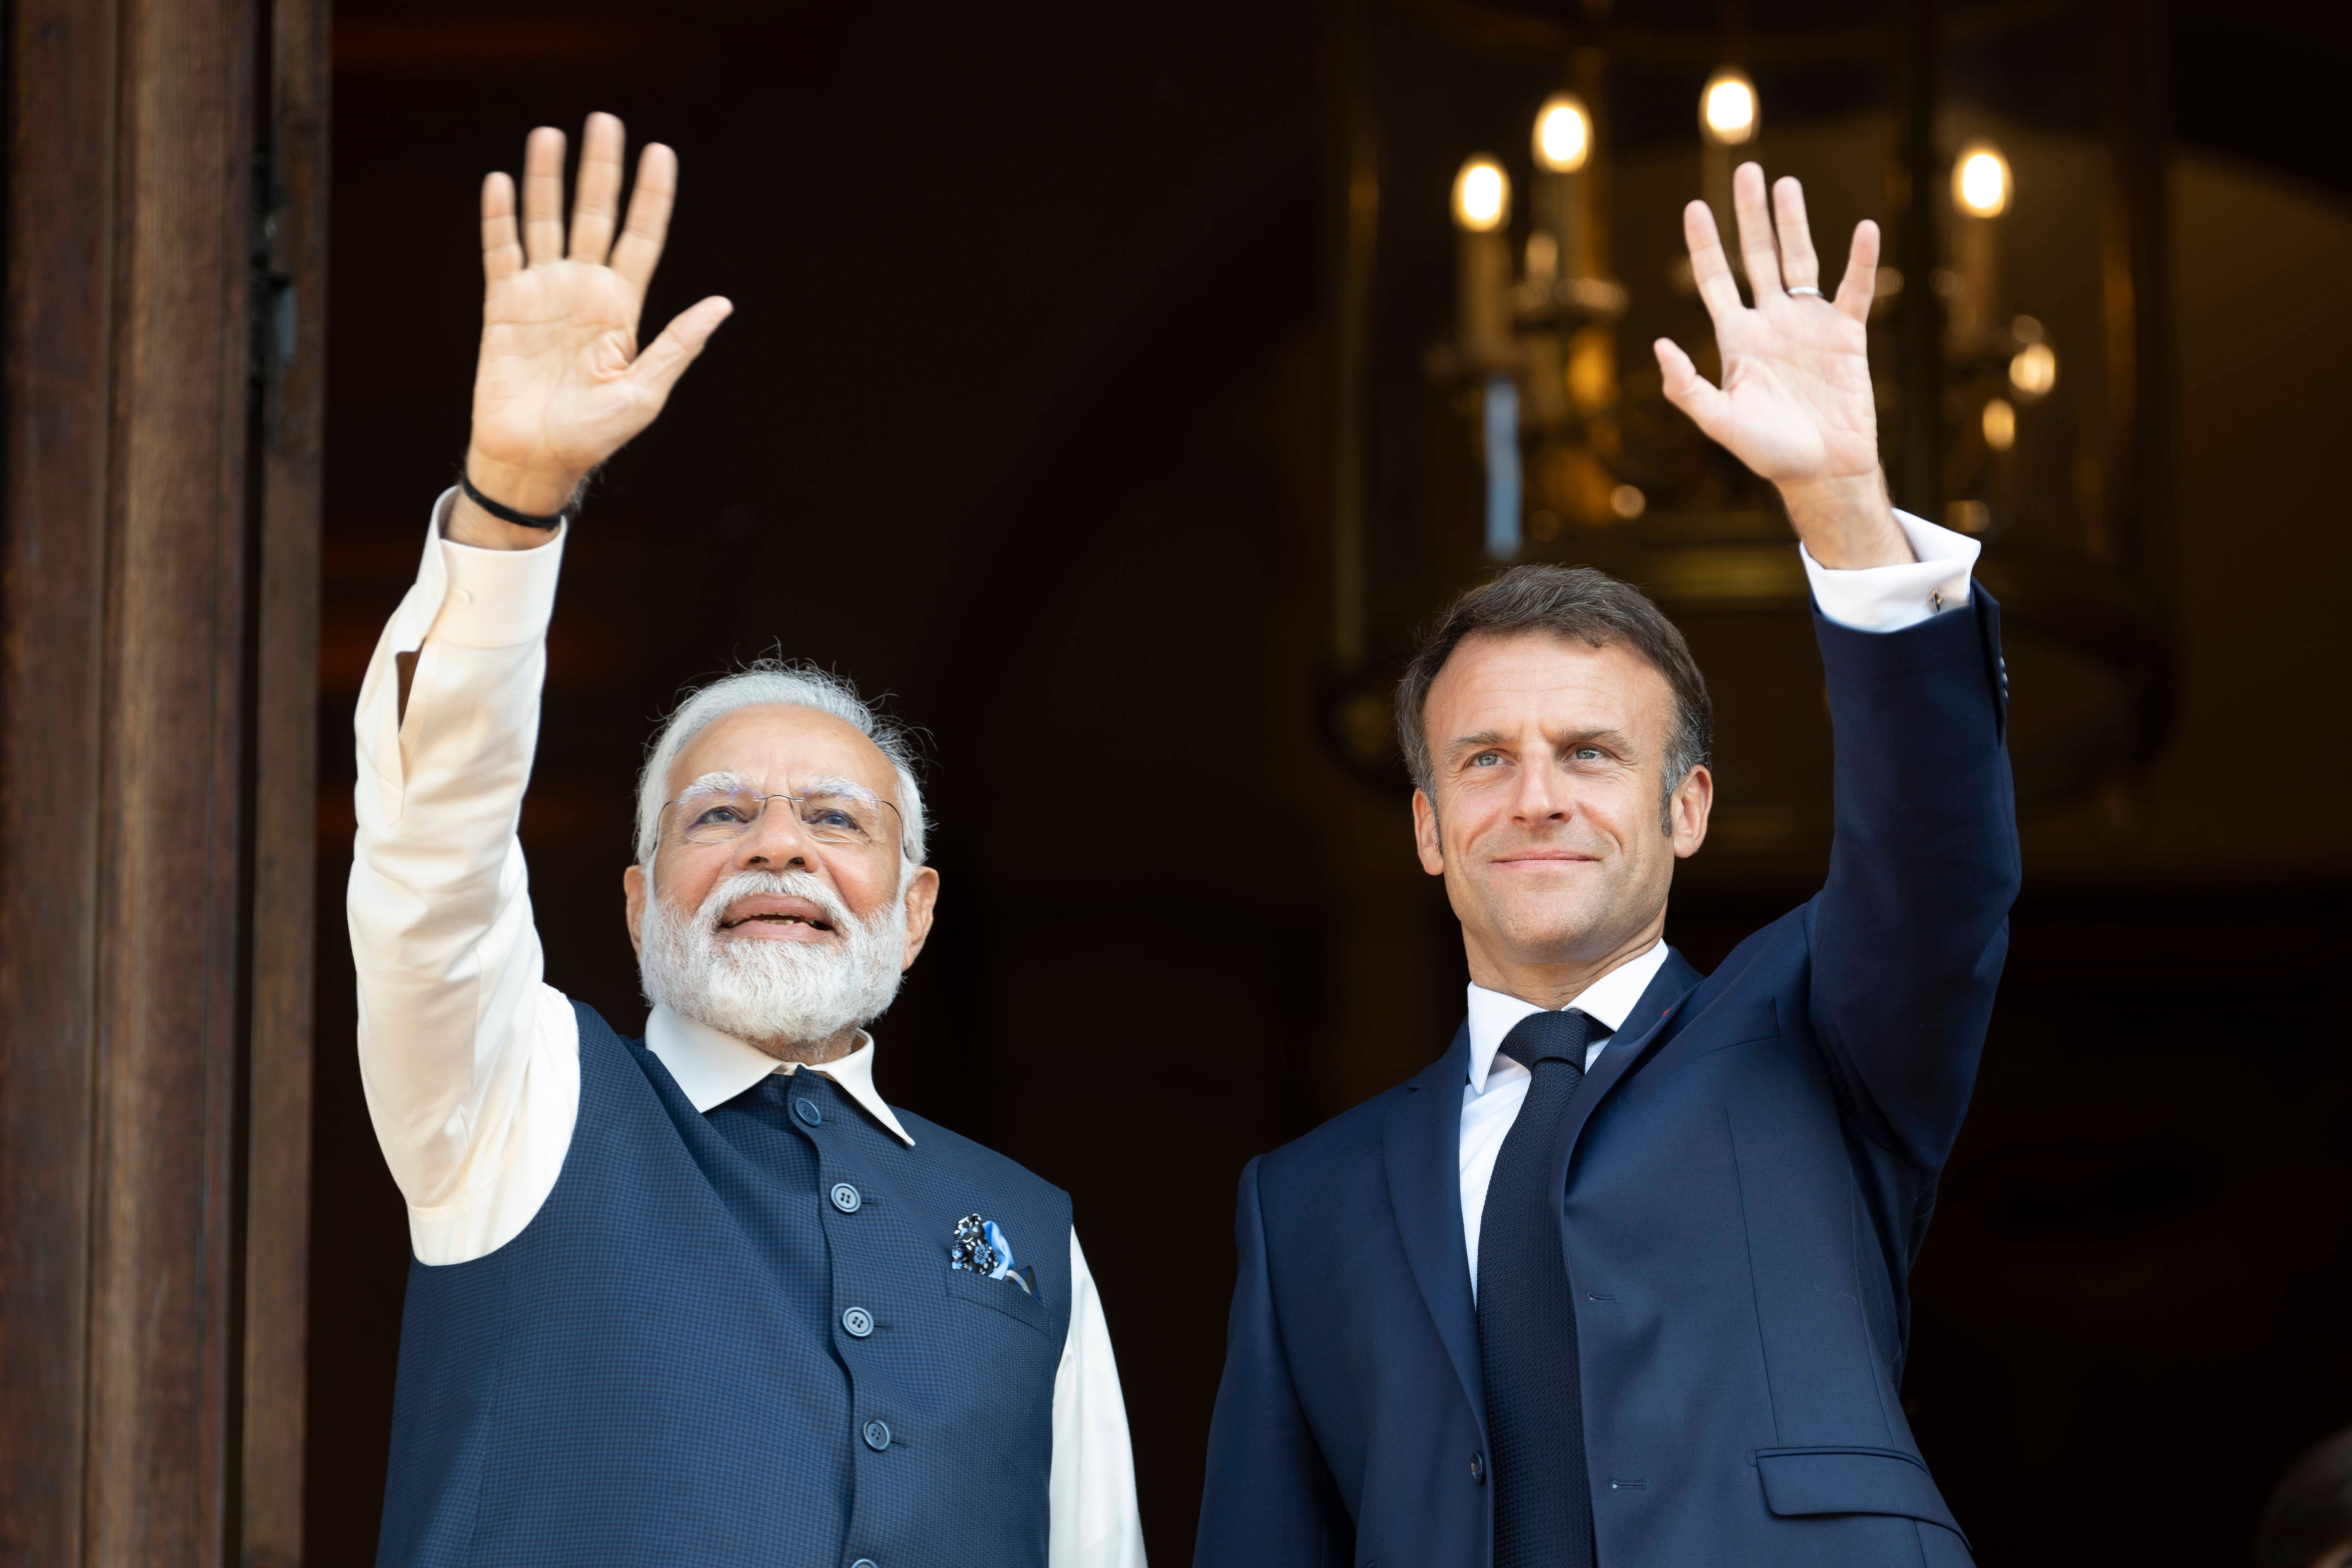 India's Prime Minister Narendra Modi (L) and France's President Emmanuel Macron attend a meeting at the Ministry of Foreign Affairs in Paris on July 14, 2023.